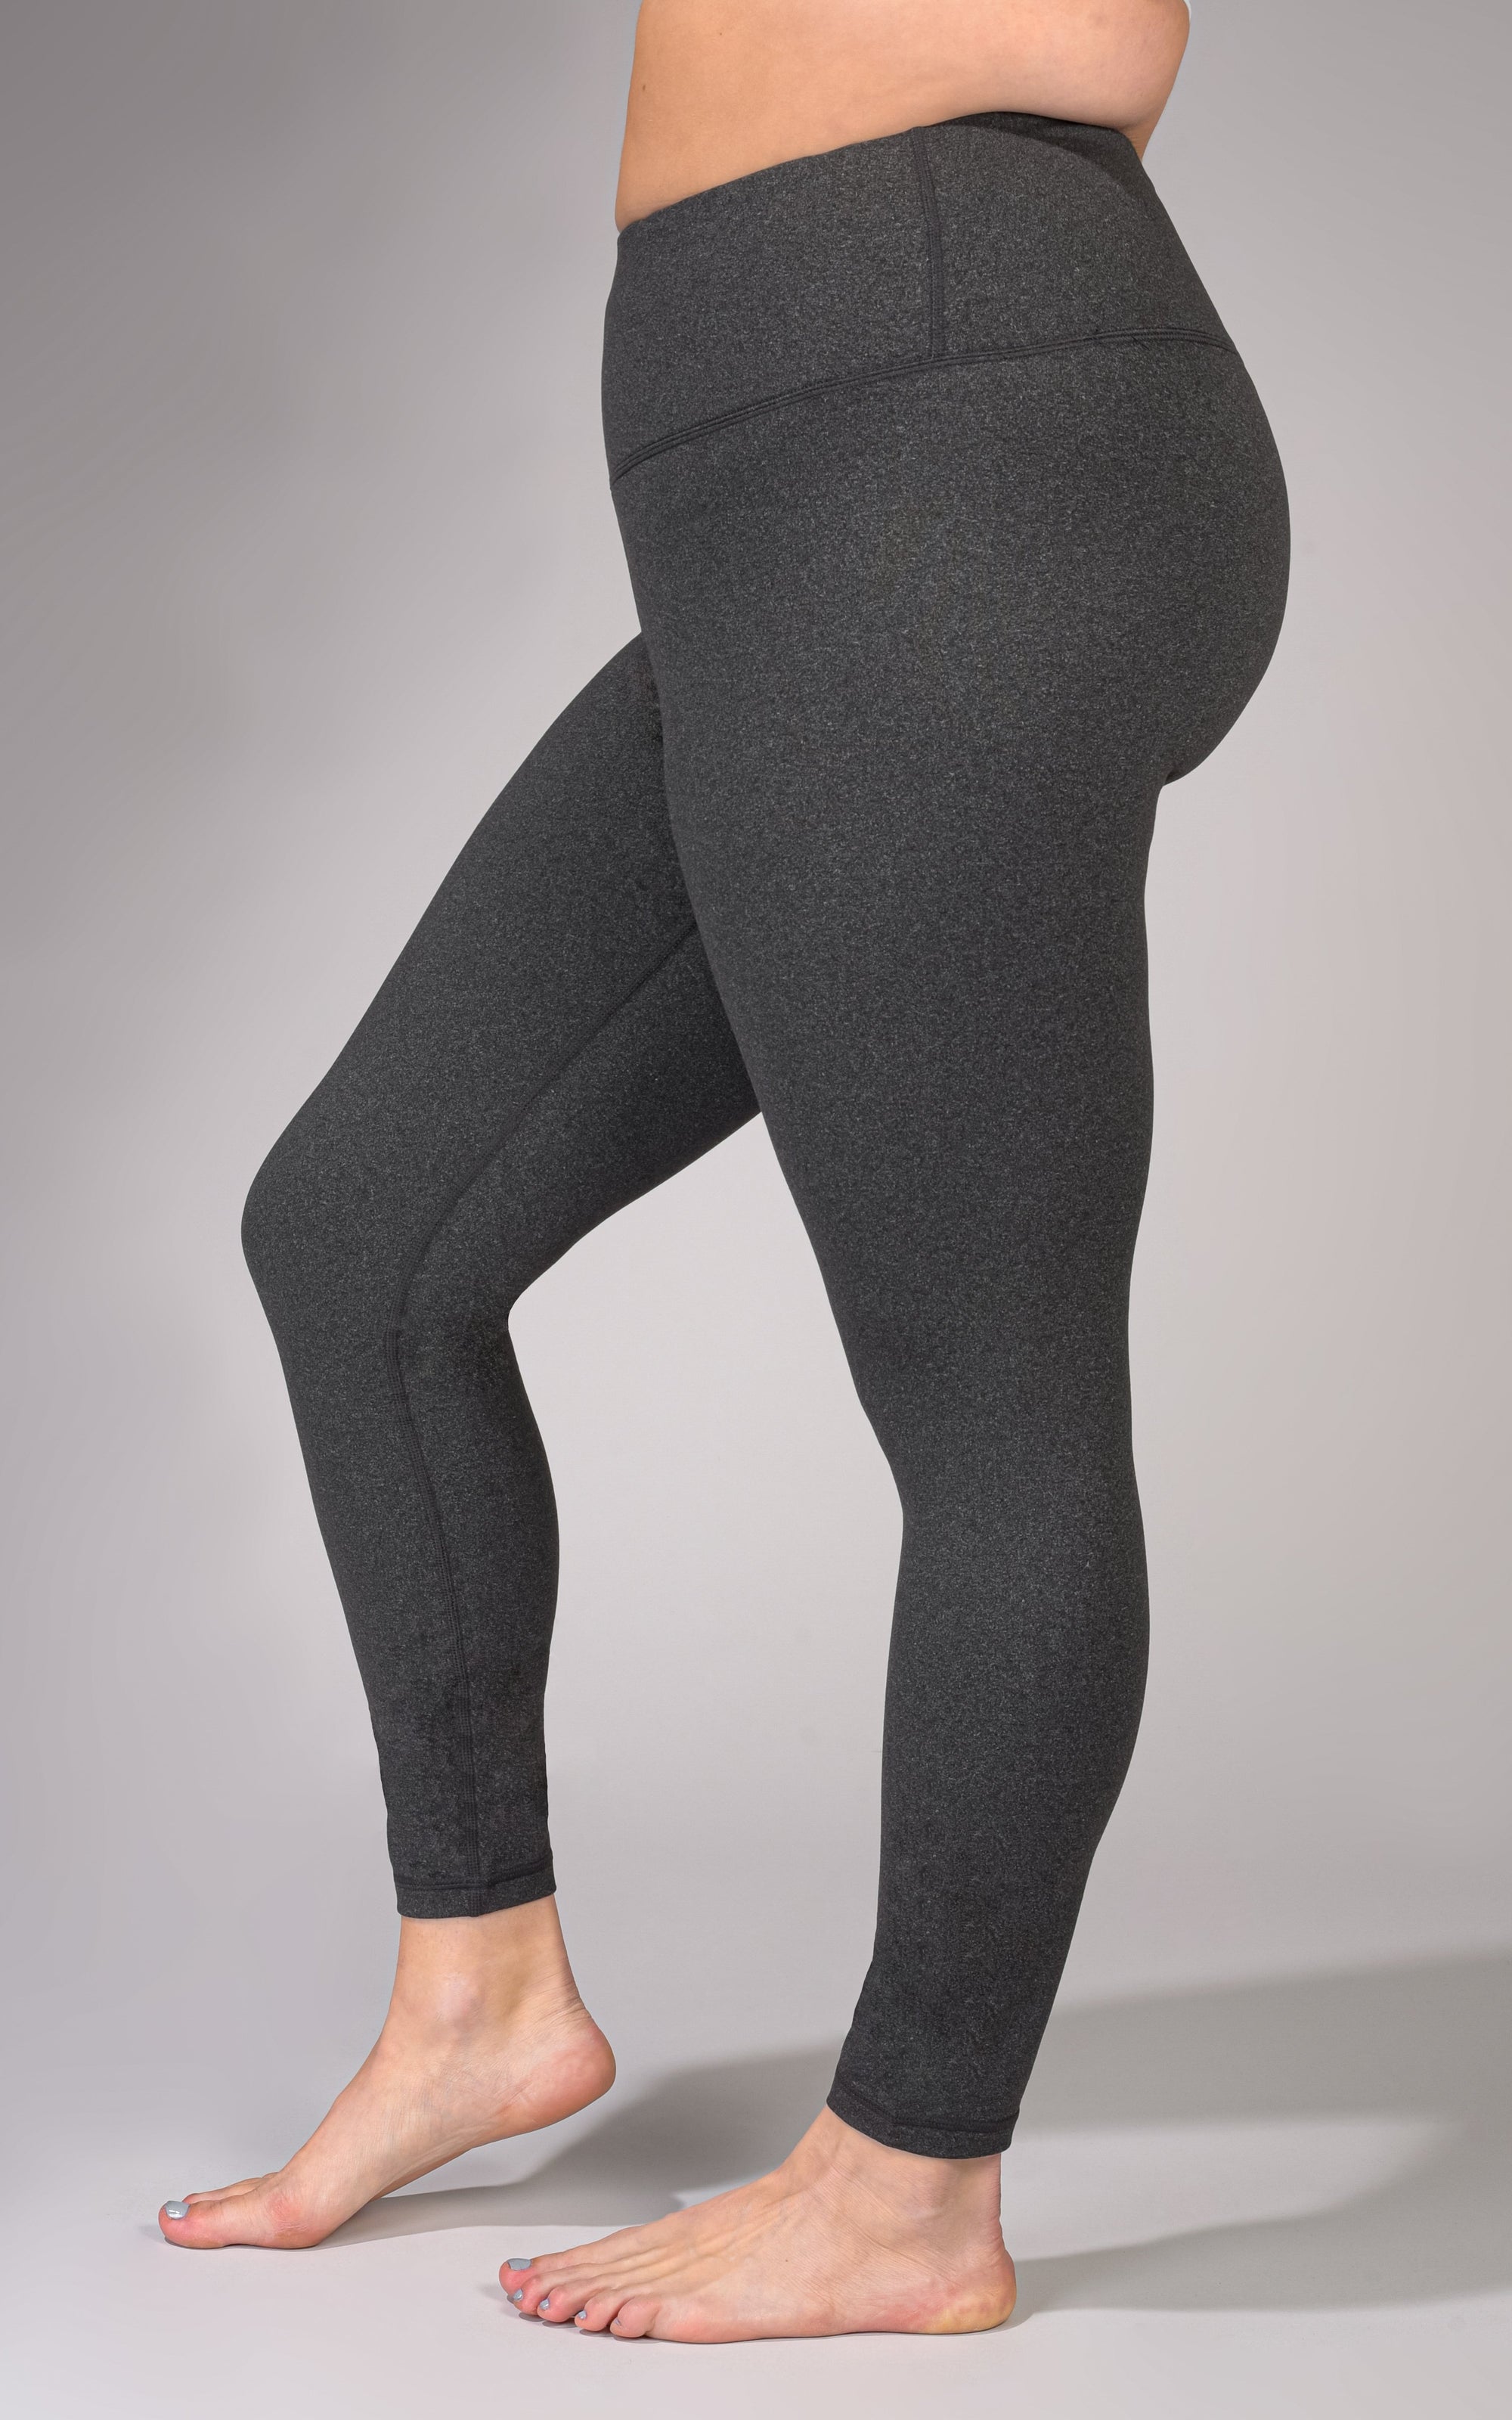 Wholesale Colored Leggings Manufacturers Suppliers